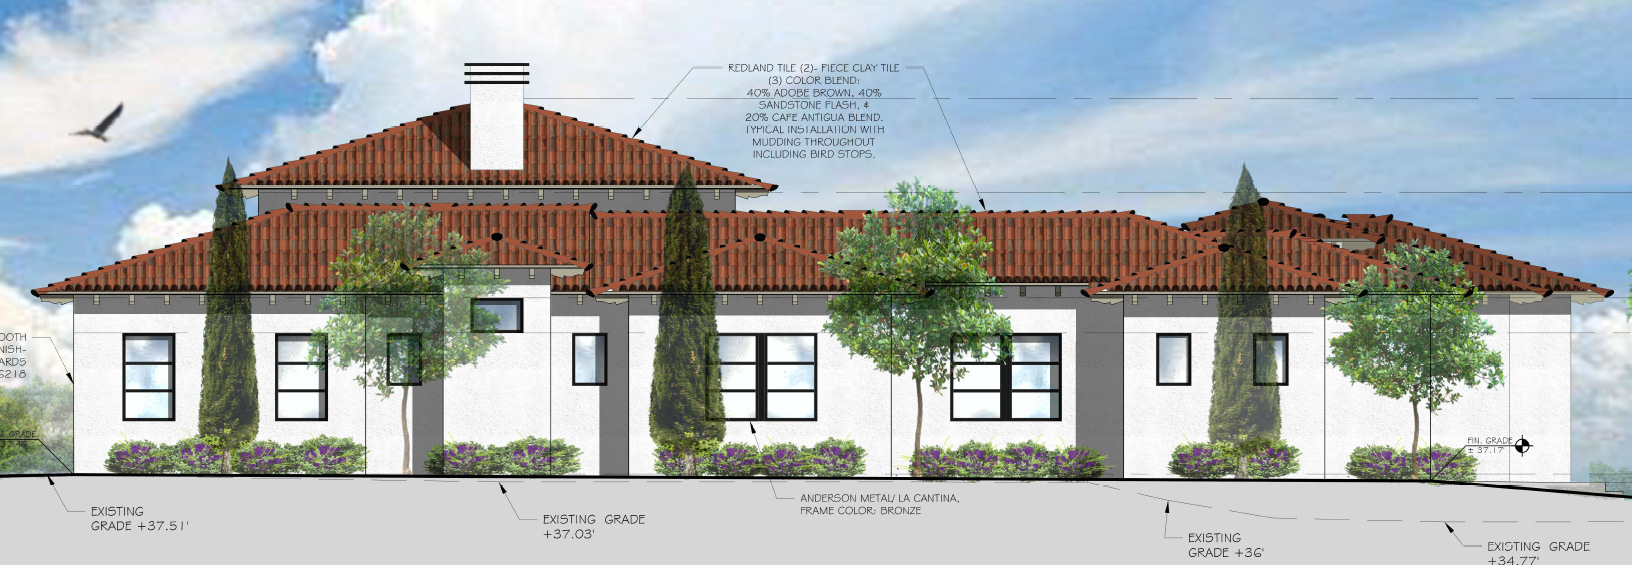 04-yng-architects-on-the-boards-la-quinta-lot-24-south-elevation.png